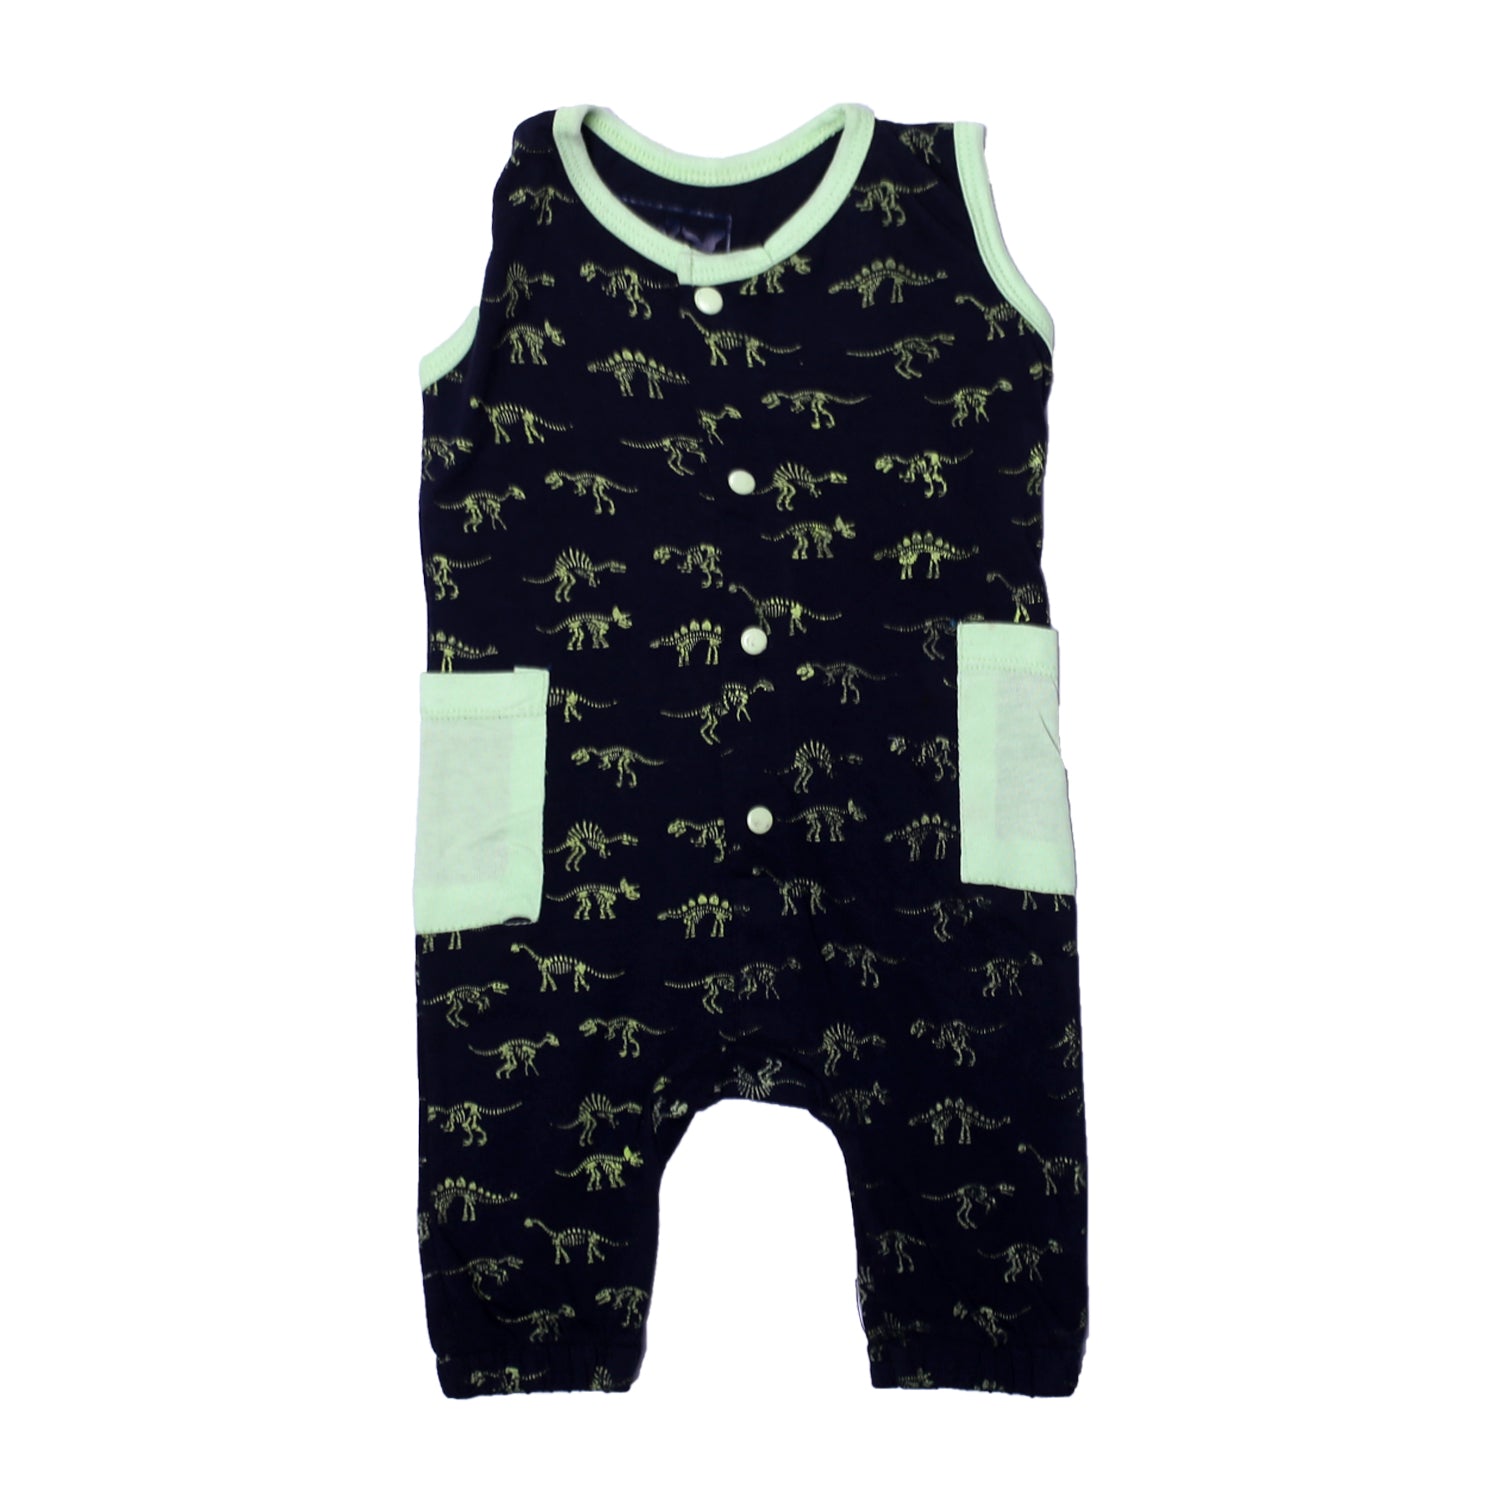 NEW NAVY BLUE FULL BODY SLEEVE LESS DINO SKELETON PRINTED WITH POCKETS ROMPER